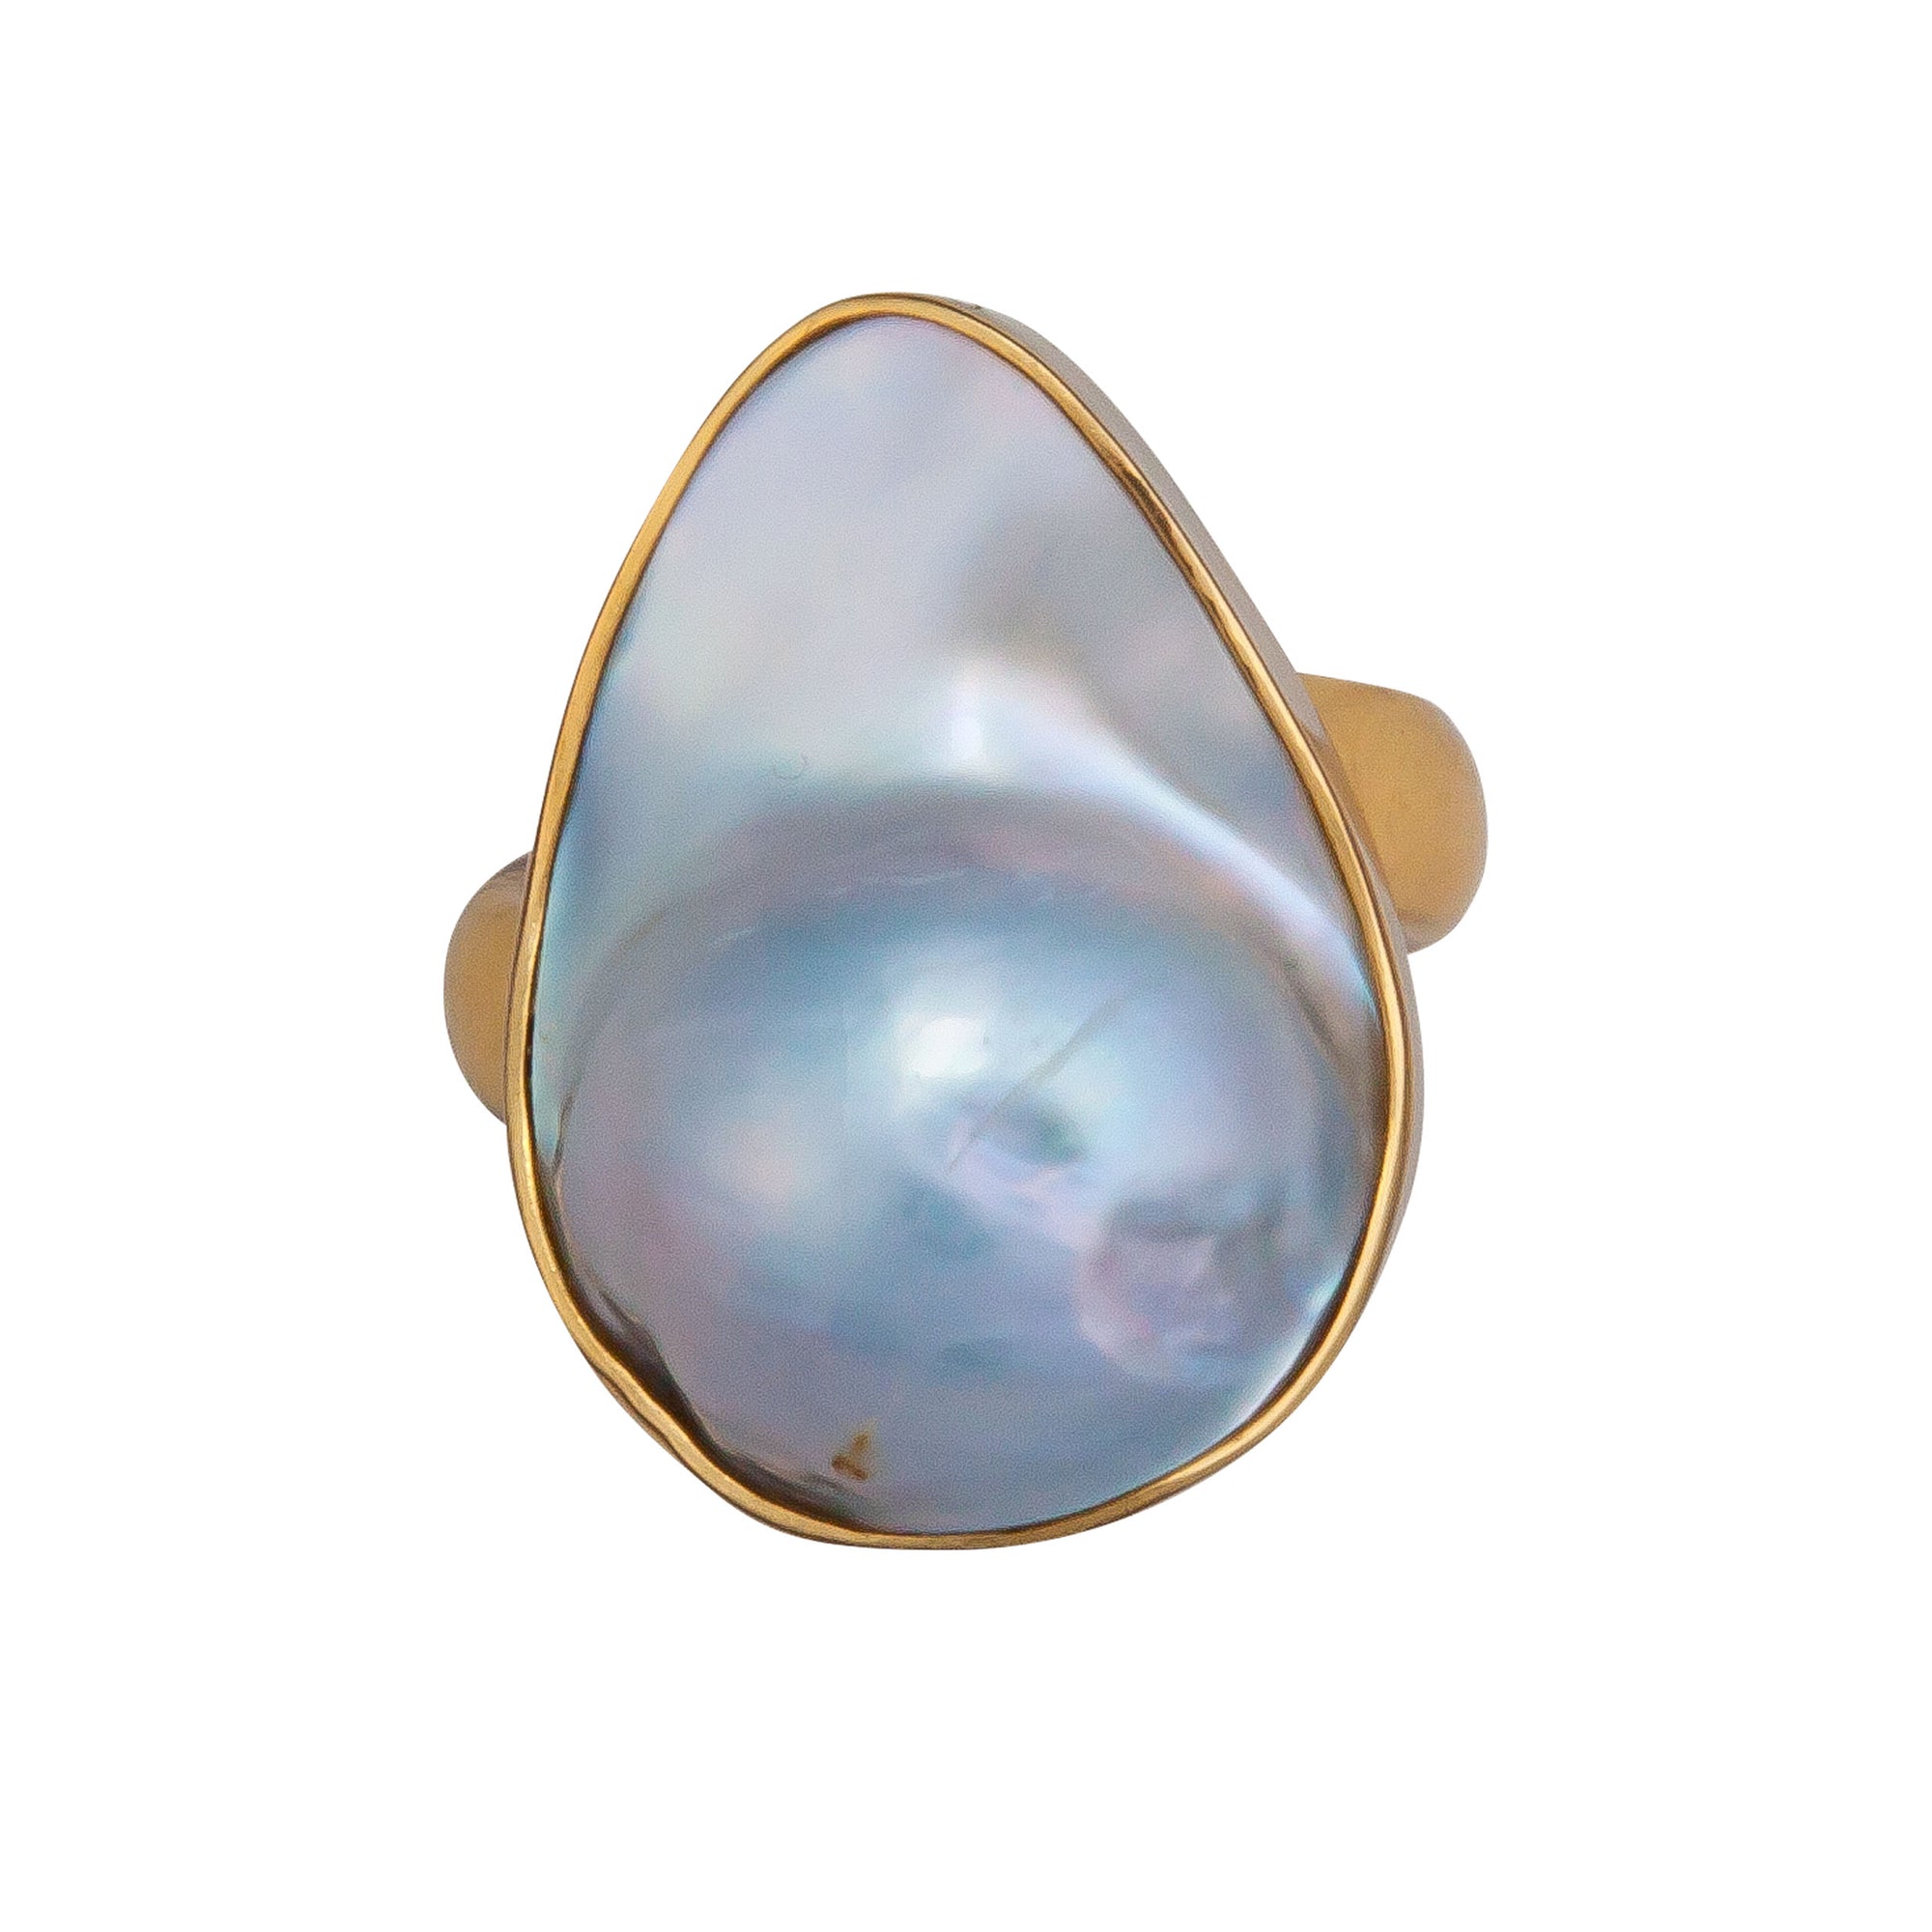 Alchemia Mabe Blister Pearl Teardrop Adjustable Ring | Charles Albert Jewelry